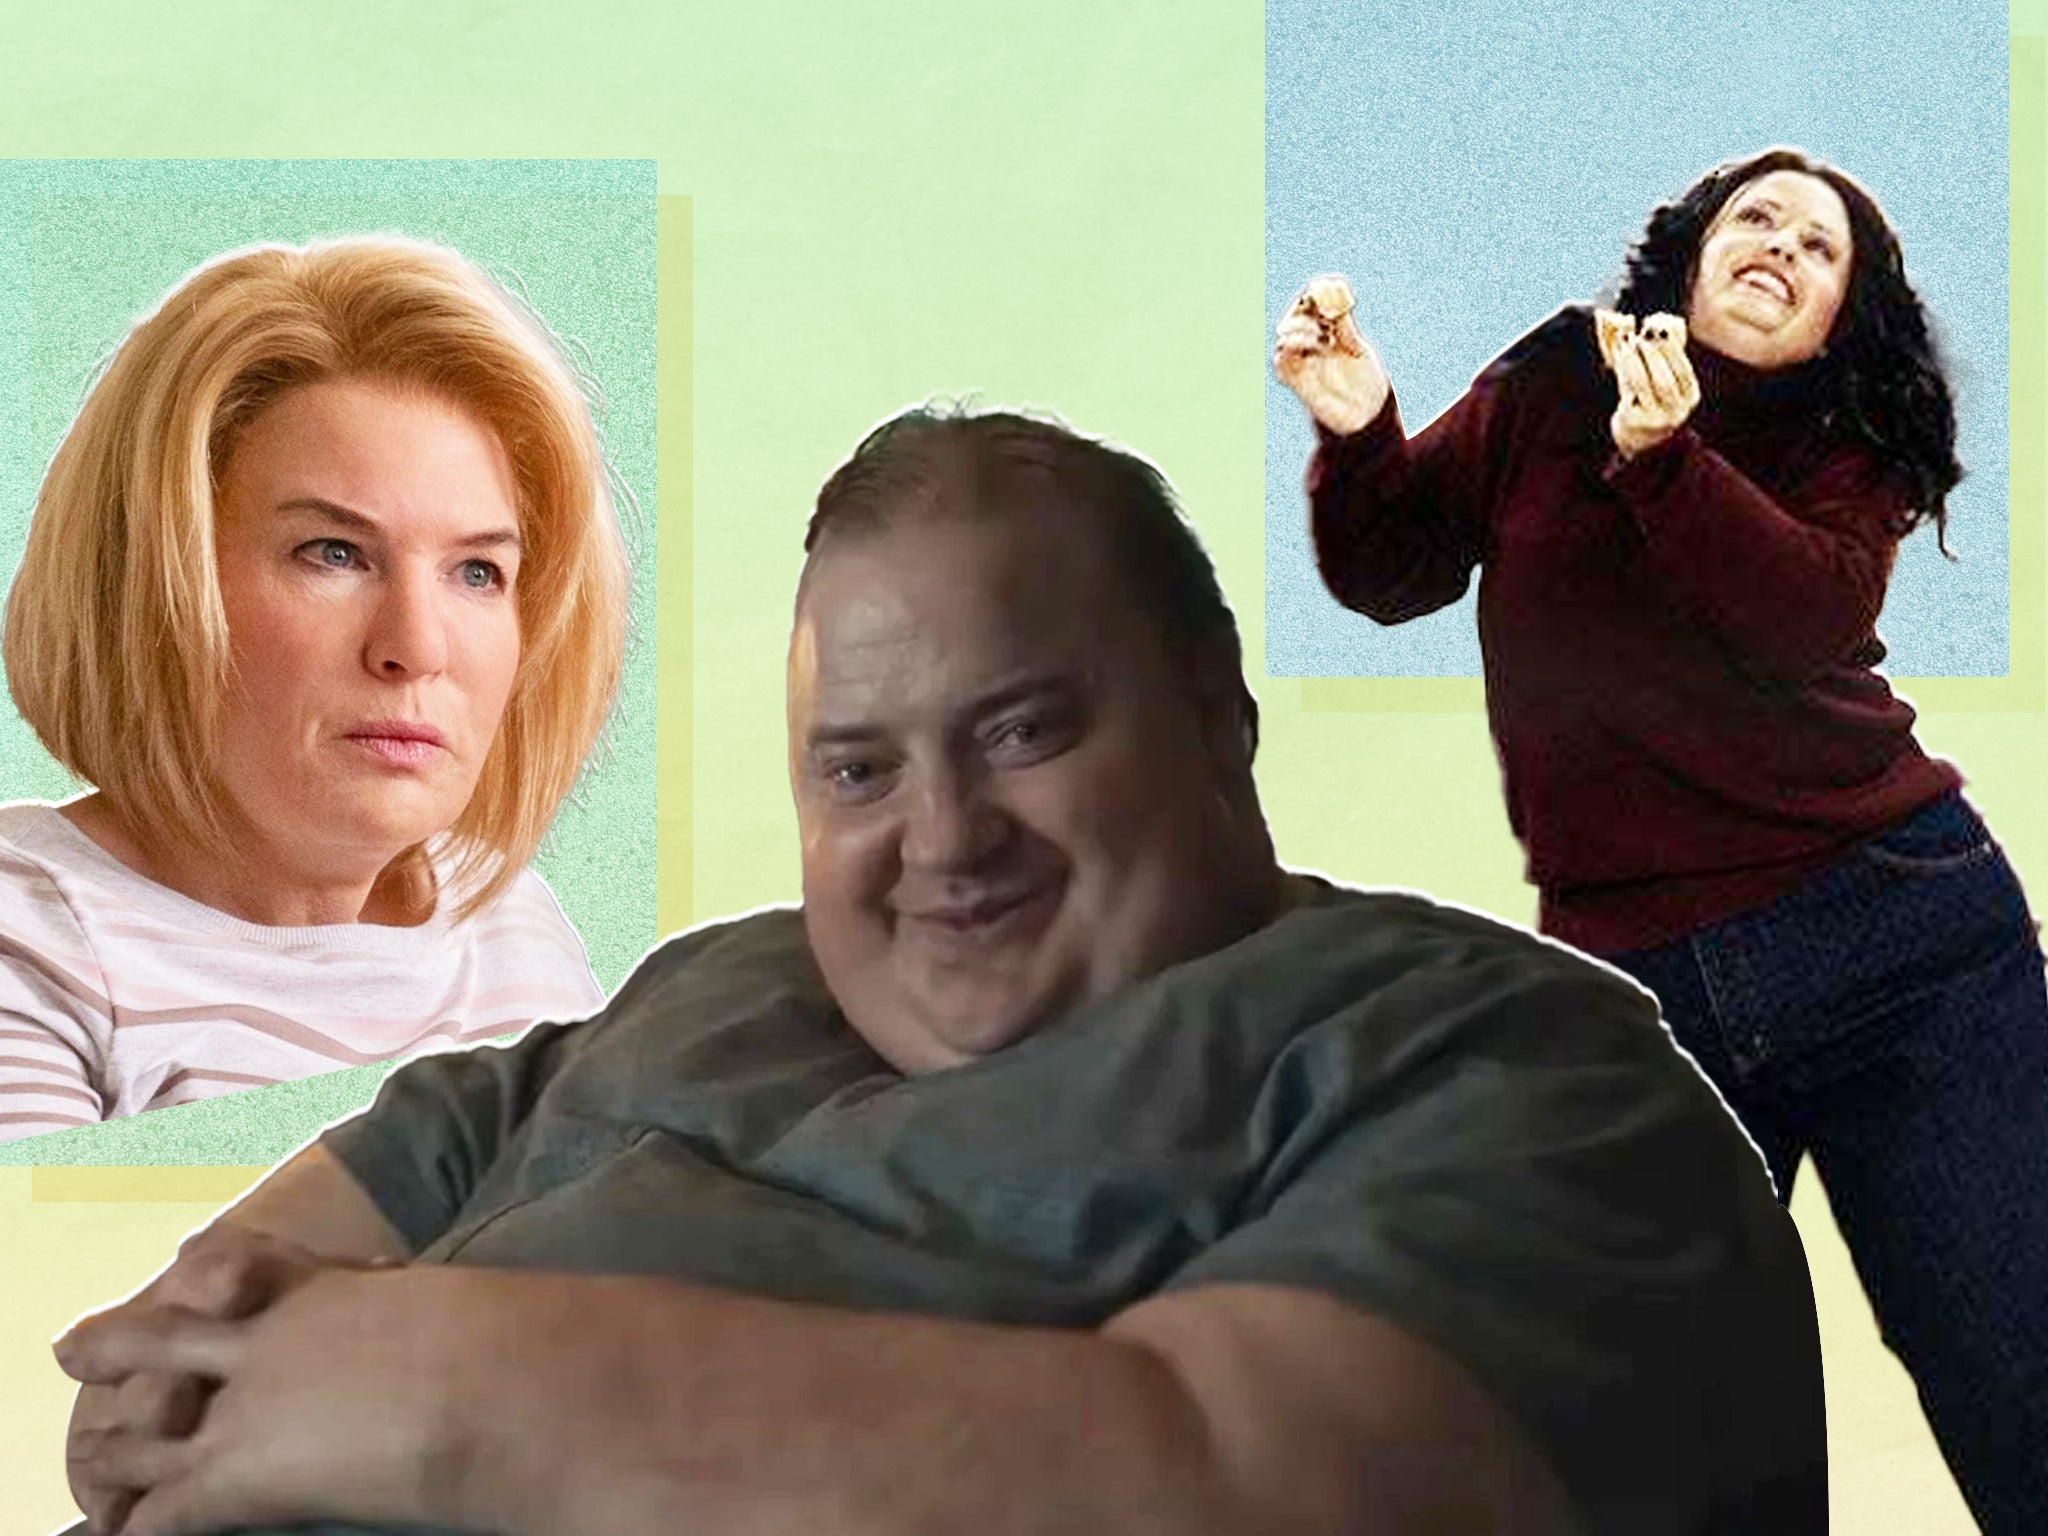 From left: Renée Zellweger in ‘The Thing About Pam’, Brendan Fraser in ‘The Whale’ and Courteney Cox in ‘Friends'